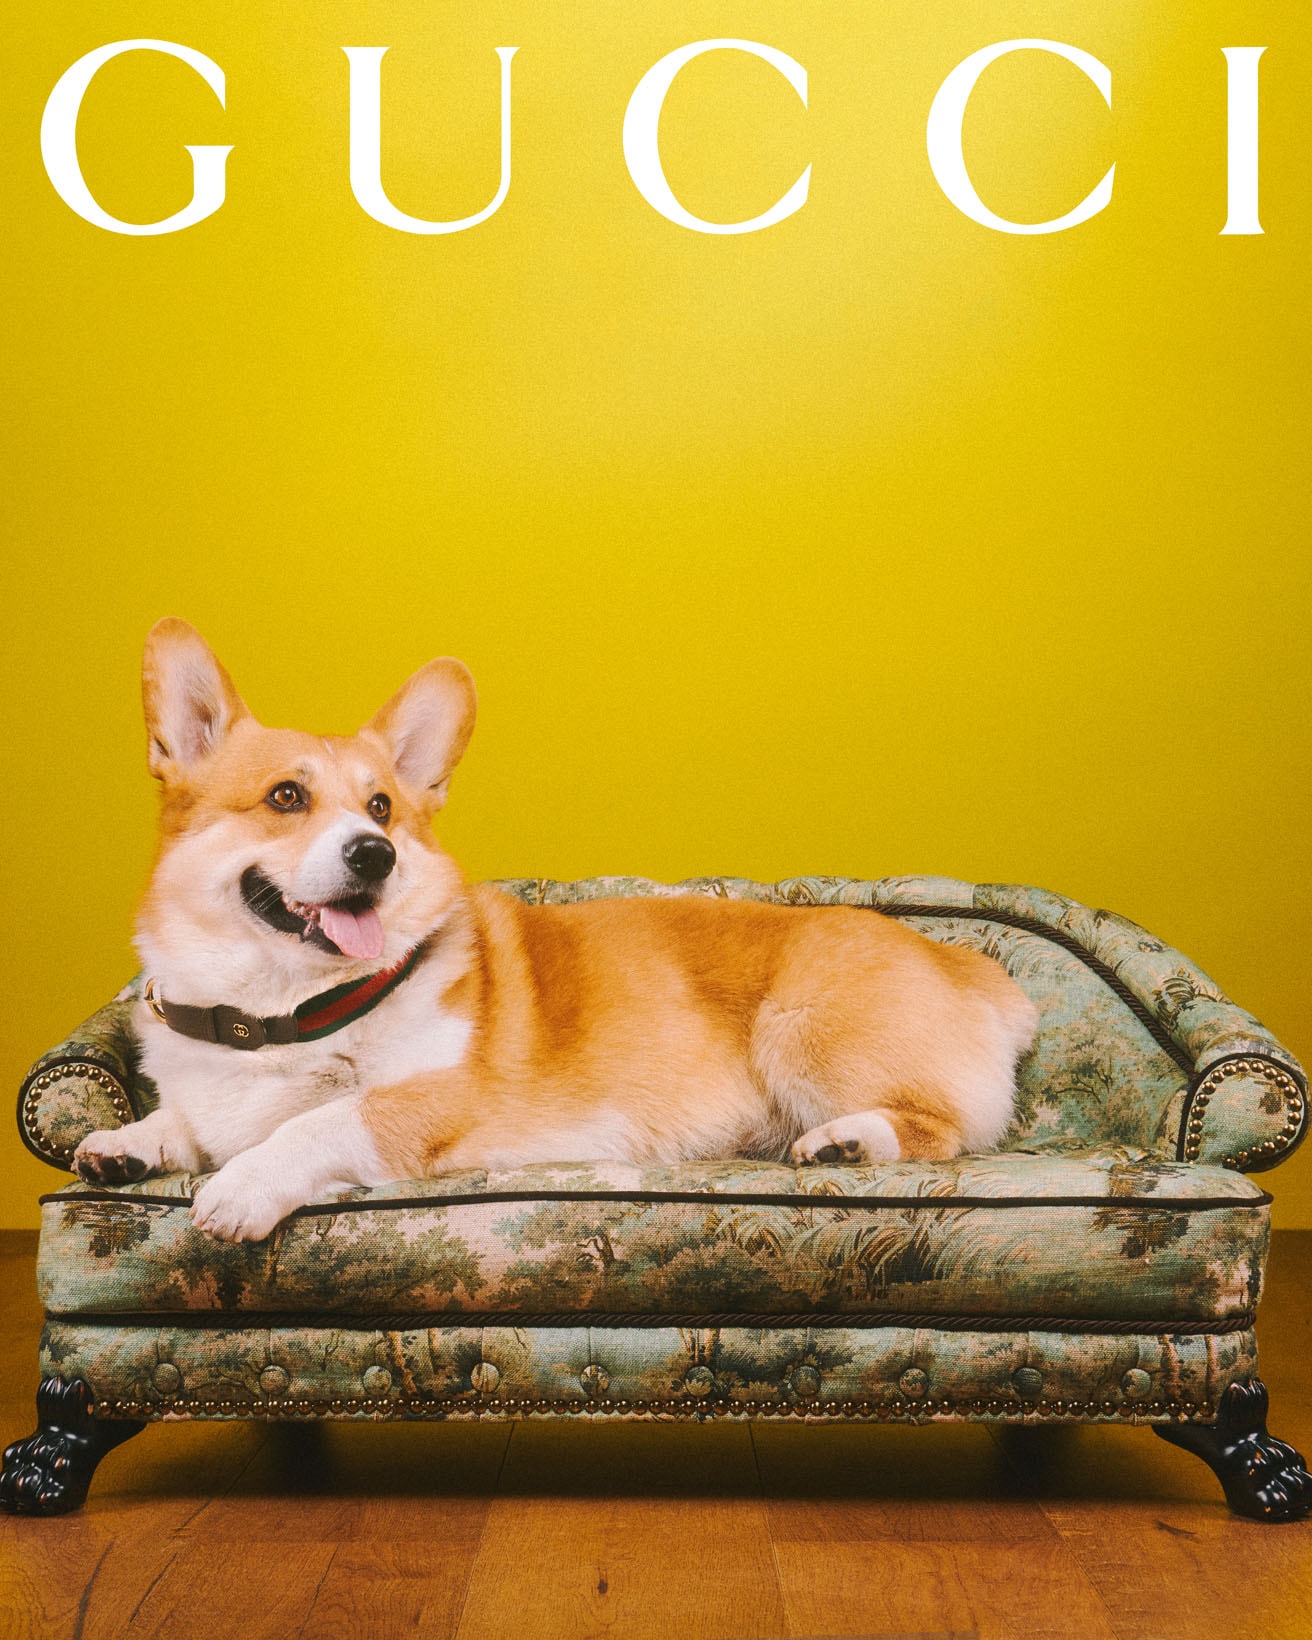 Gucci Pet Collection Dogs Cats Collars Leashes Harnesses Accessories Campaign Release Price Info